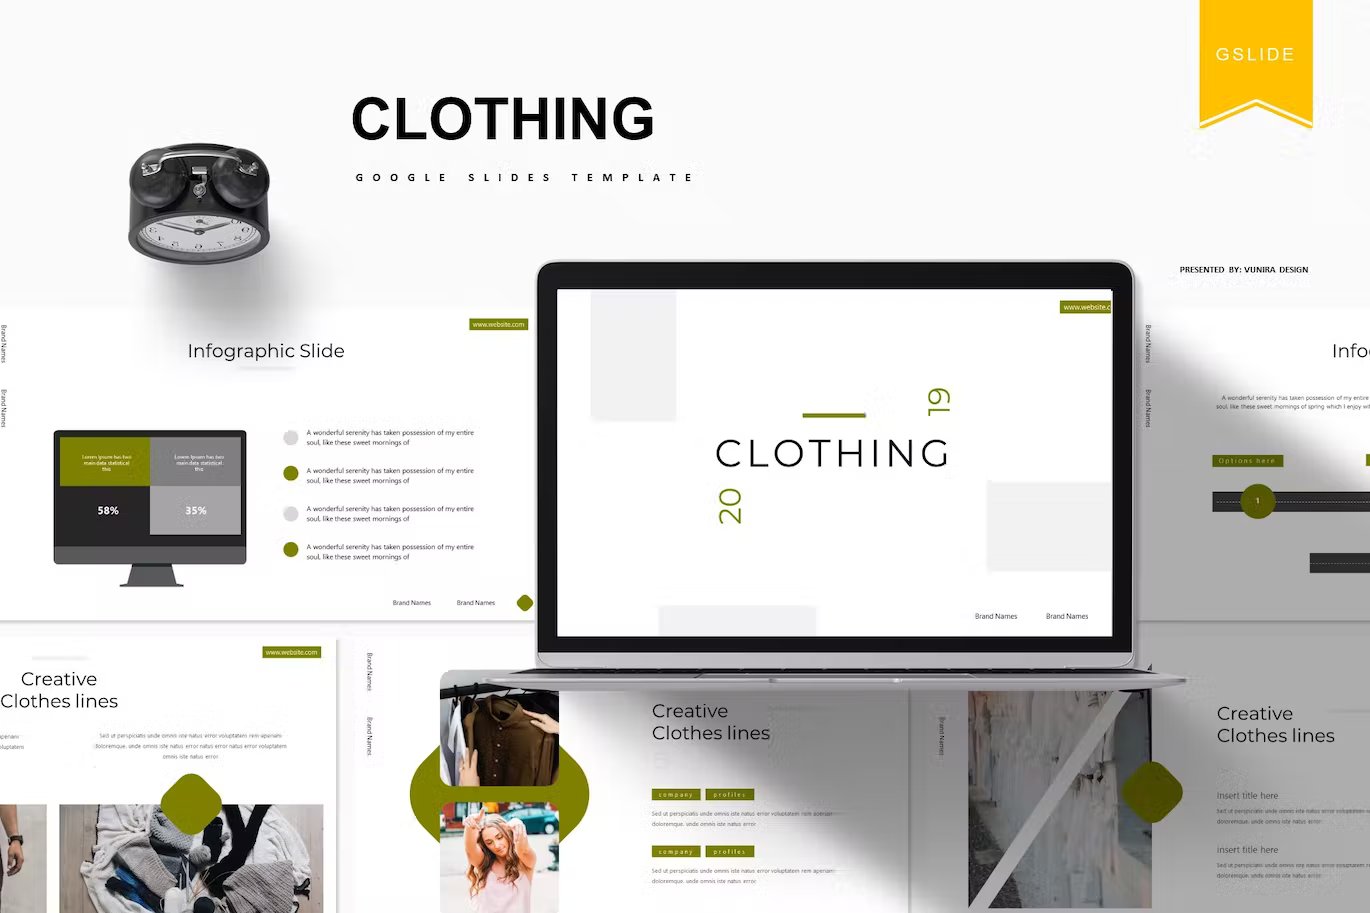 Black lettering "Clothing Google Slides Template" and different templates on a gray background.